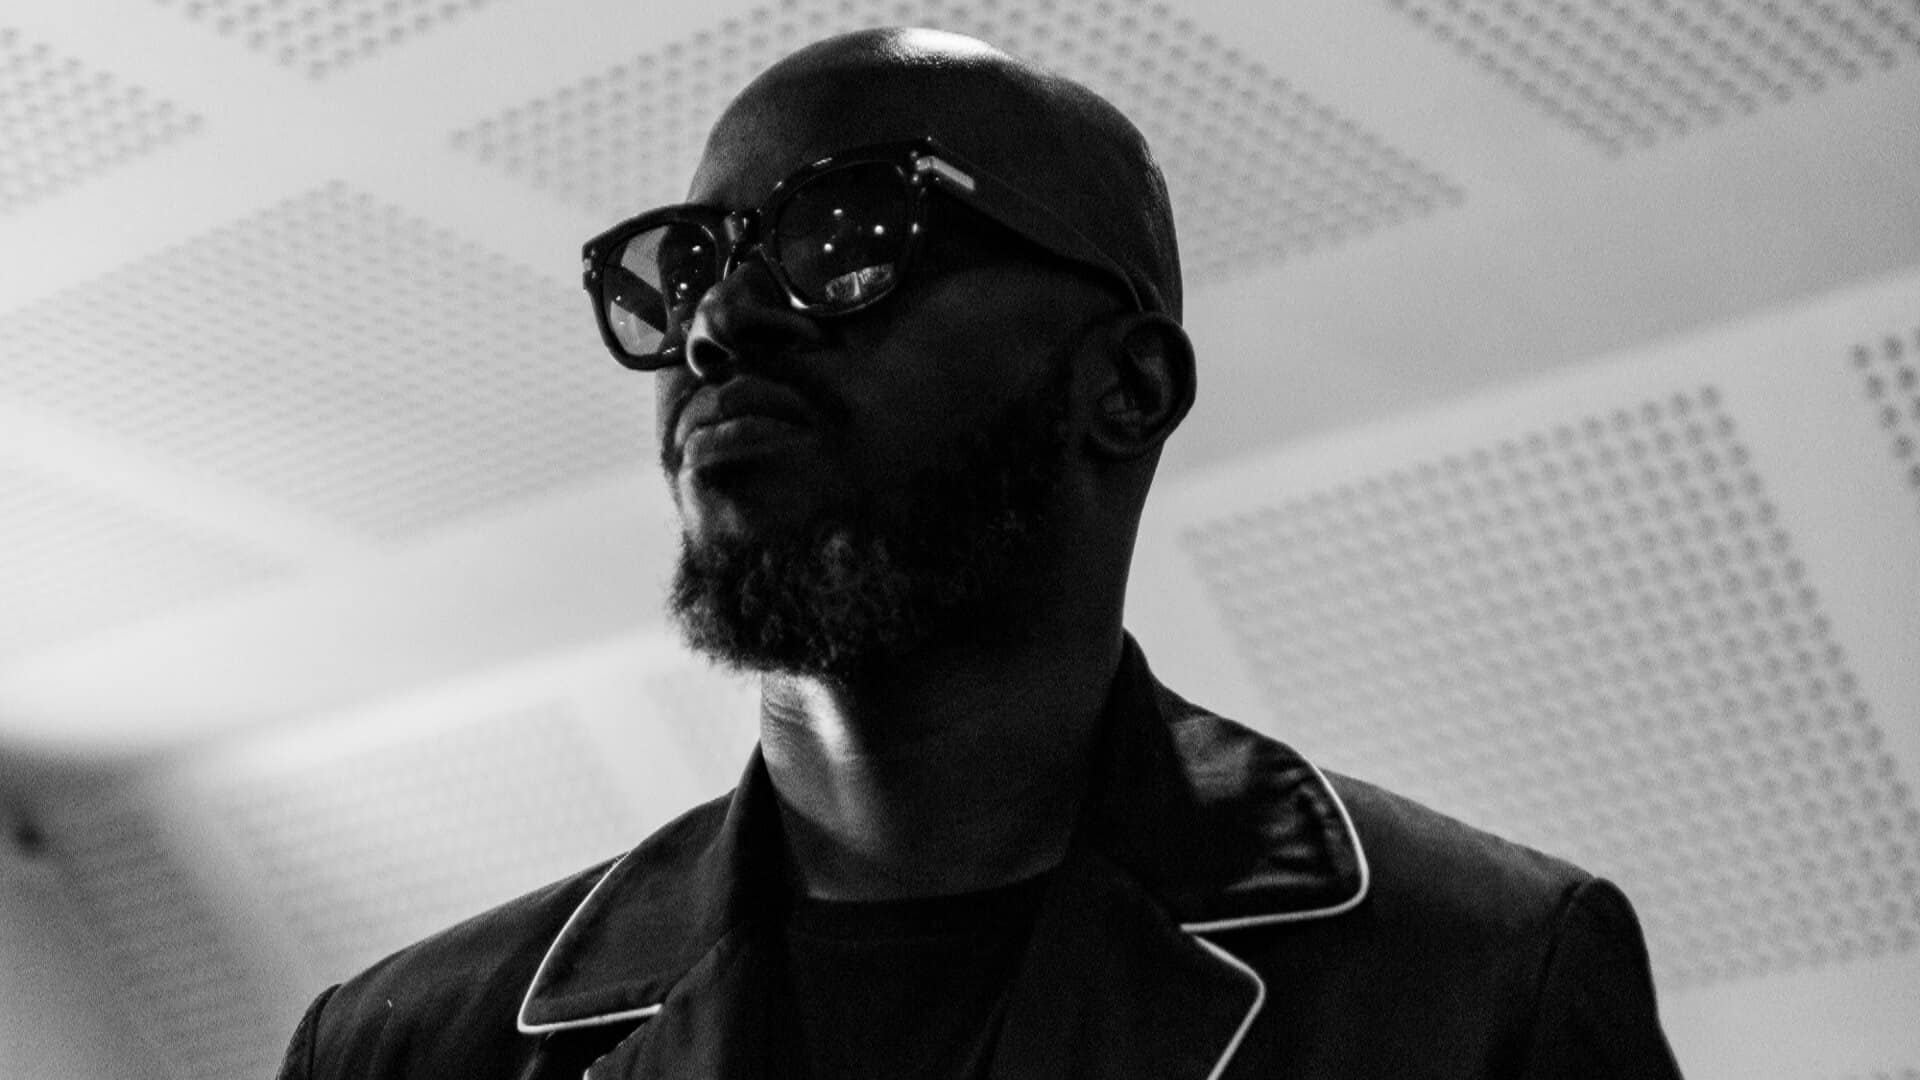 BREAKING: Black Coffee involved in a serious travel accident